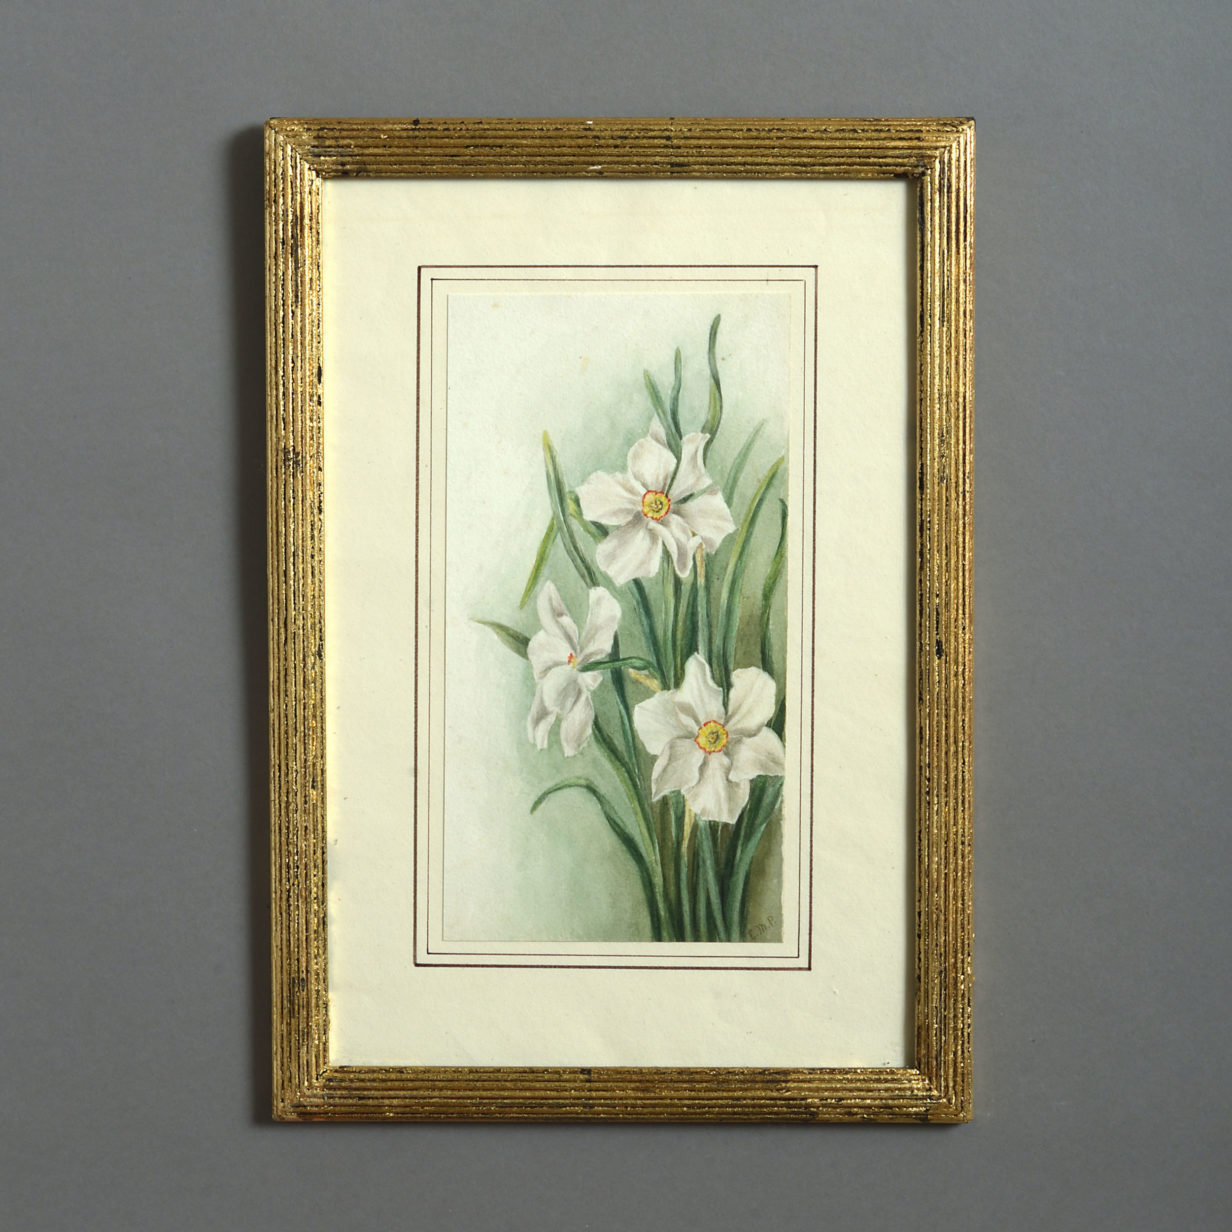 A late 19th century watercolour study of narcissi